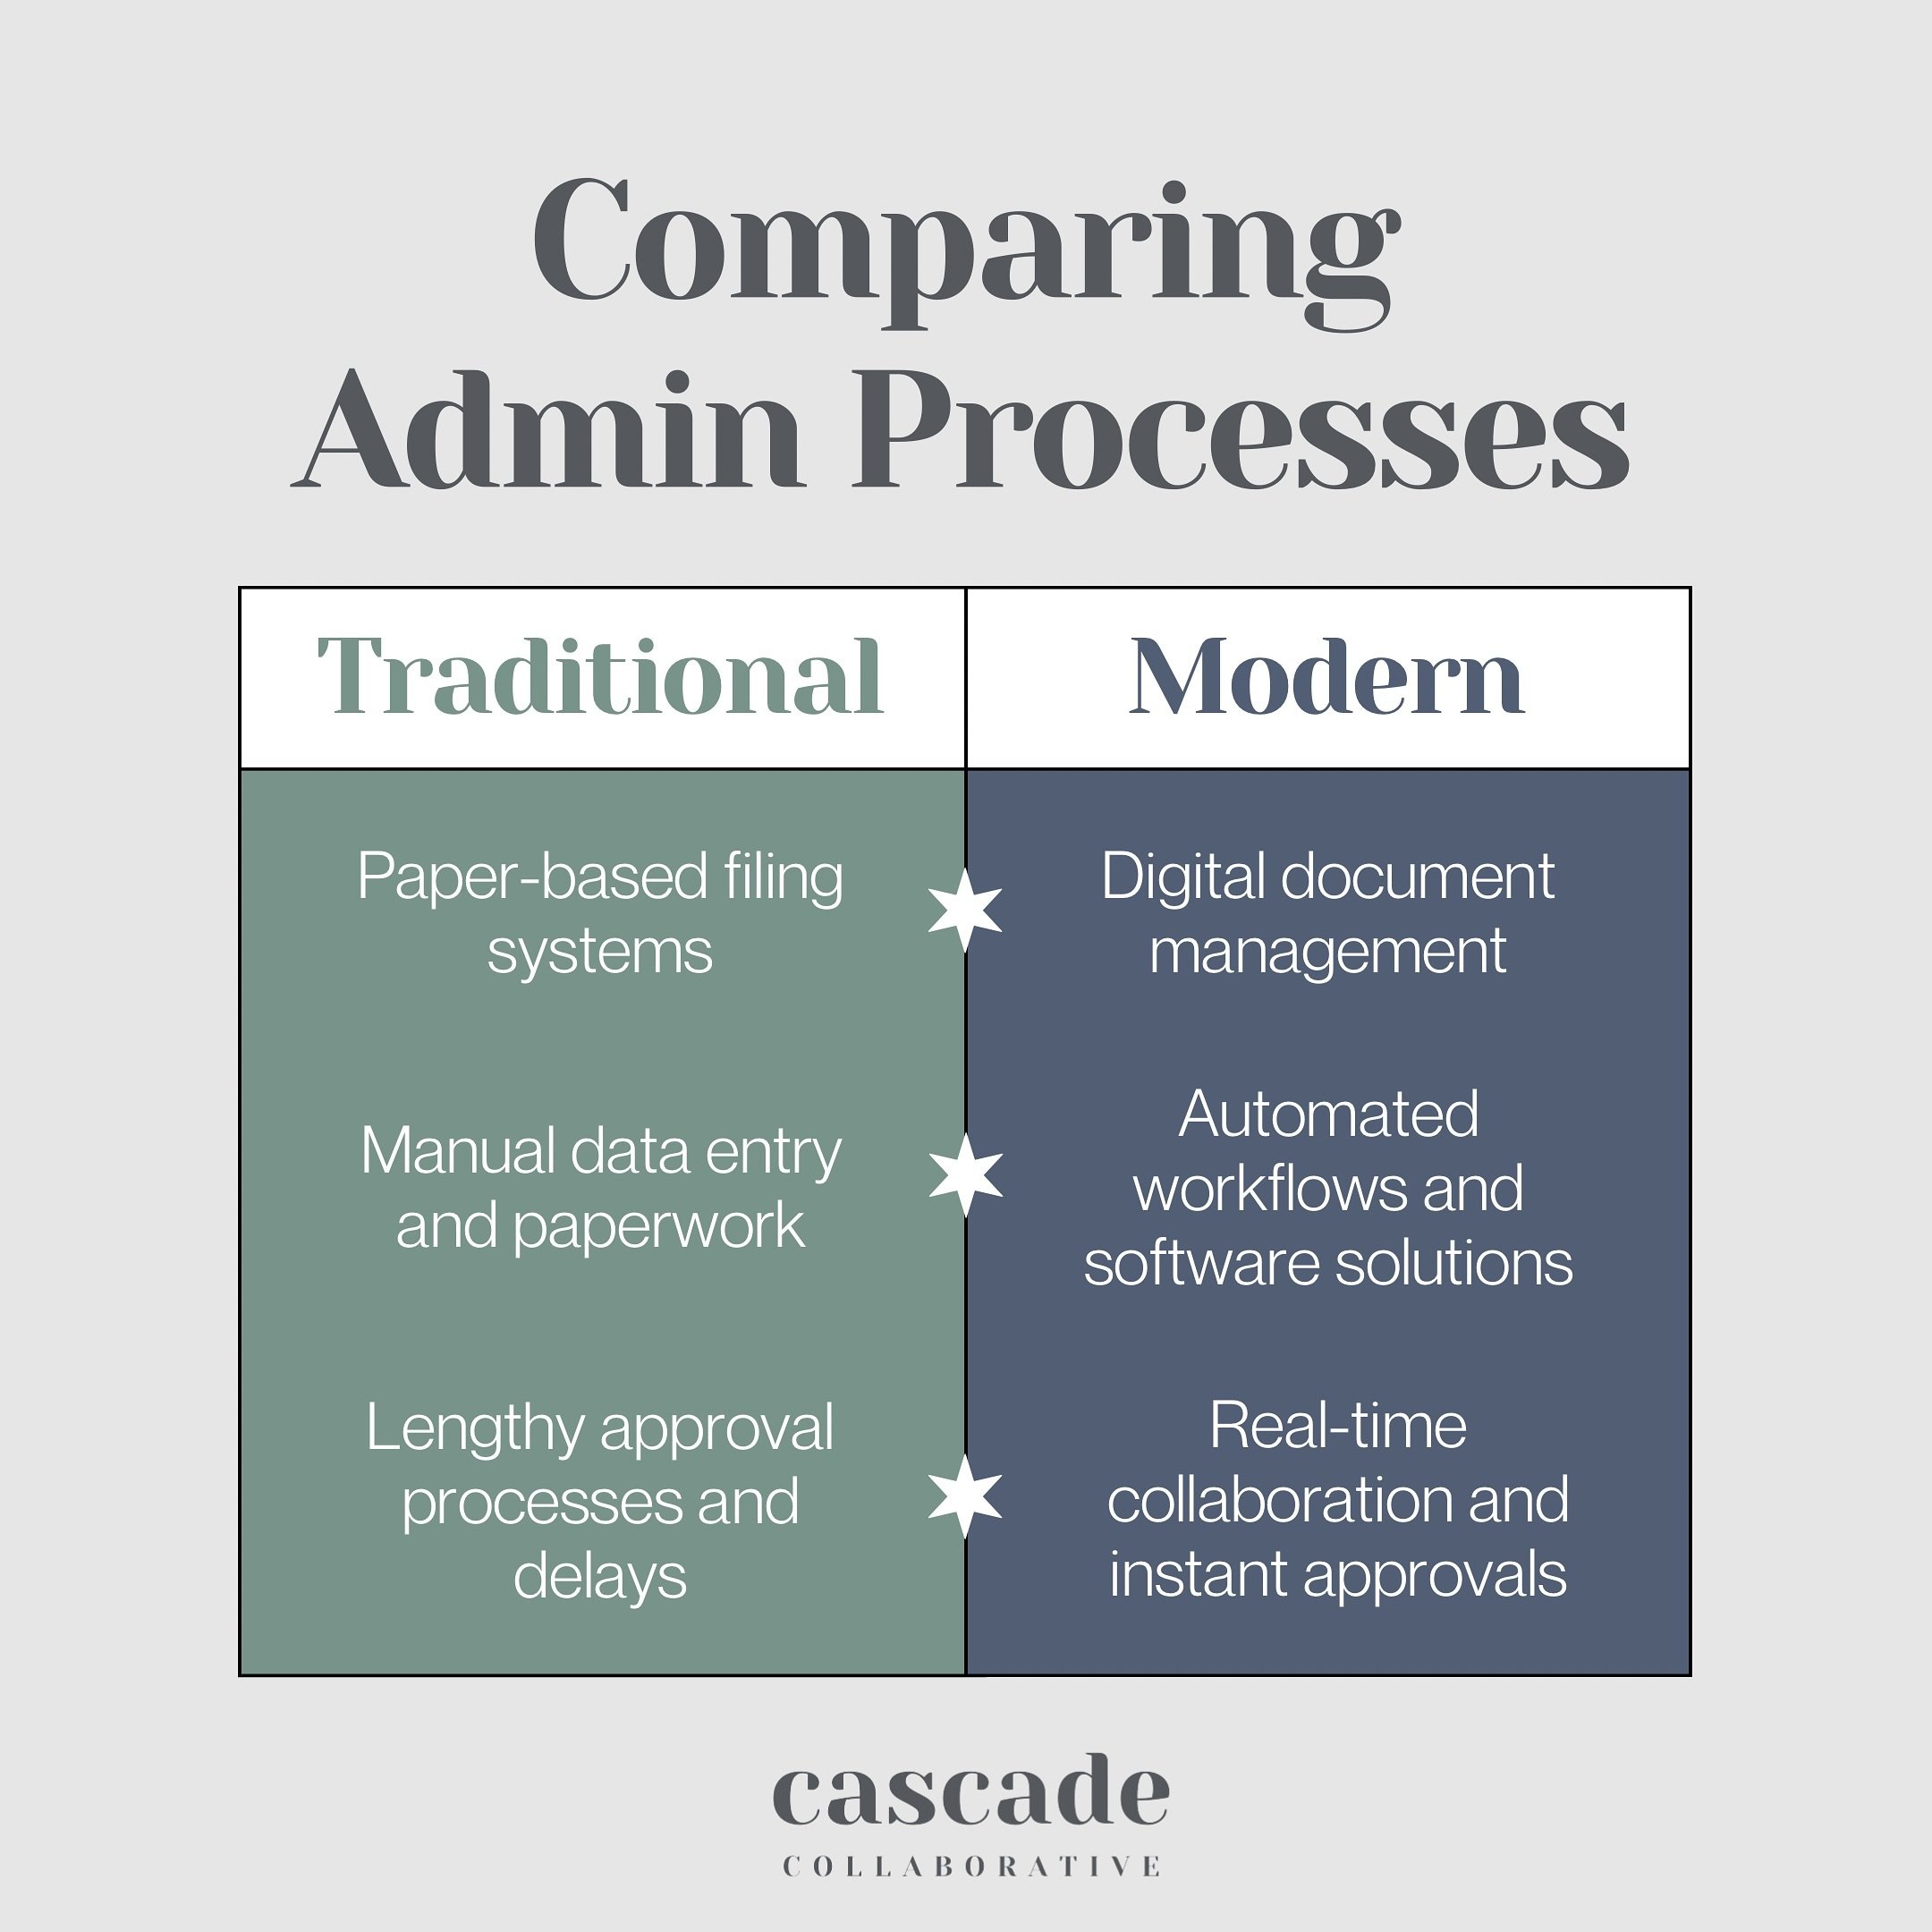 Which approach does your business currently use? Let Cascade Collaborative help you make the leap to modern efficiency! 

#StreamlineYourBusiness #ModernizeToday  #WorkSmarterNotHarder #cascadecollaborative